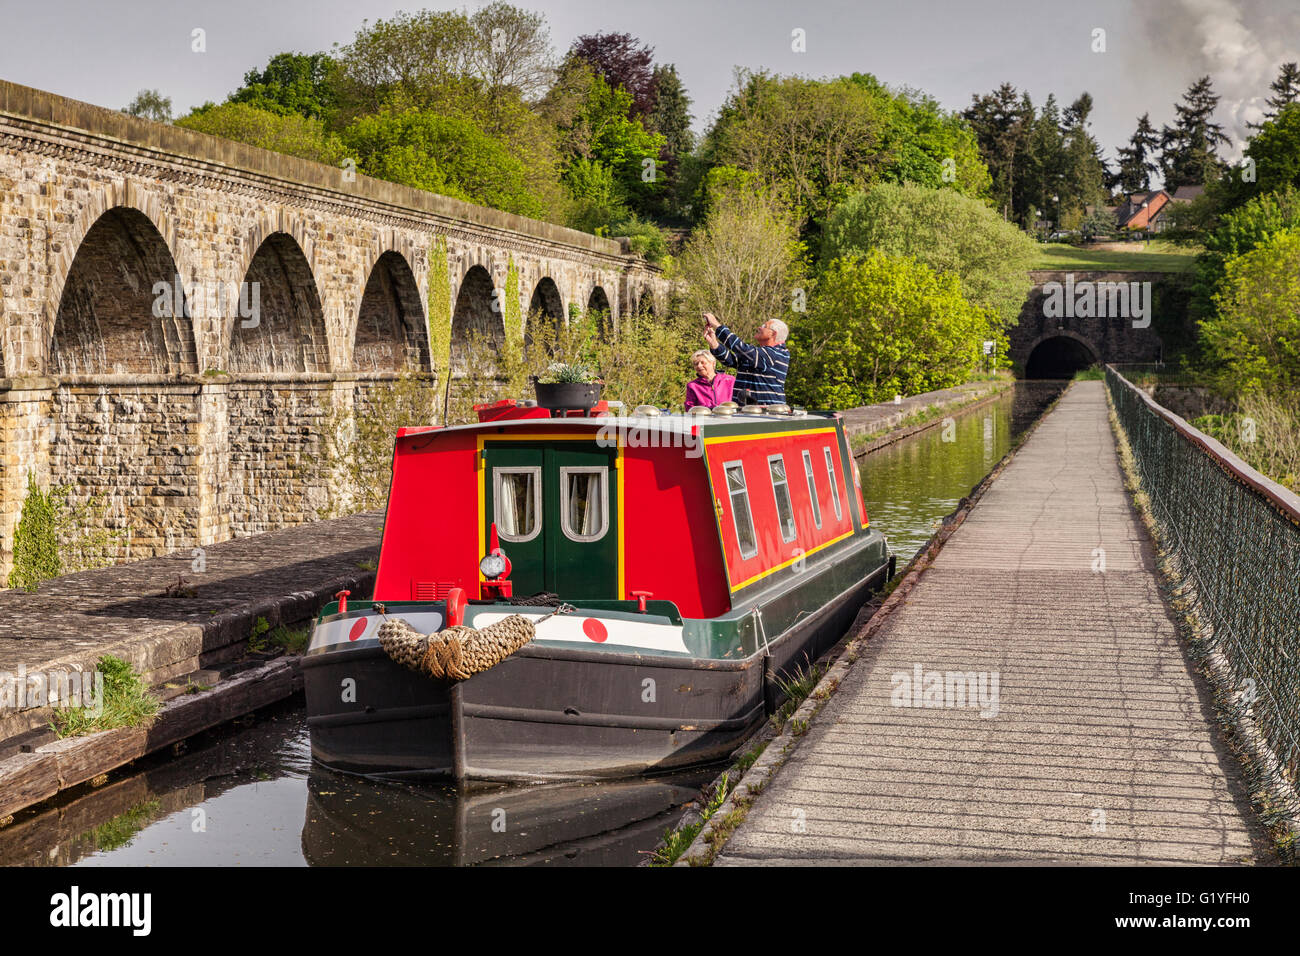 Senior couple in narrowboat crossing Chirk Aqueduct and taking photos of railway viaduct, Chirk, County Borough of Wrexham... Stock Photo